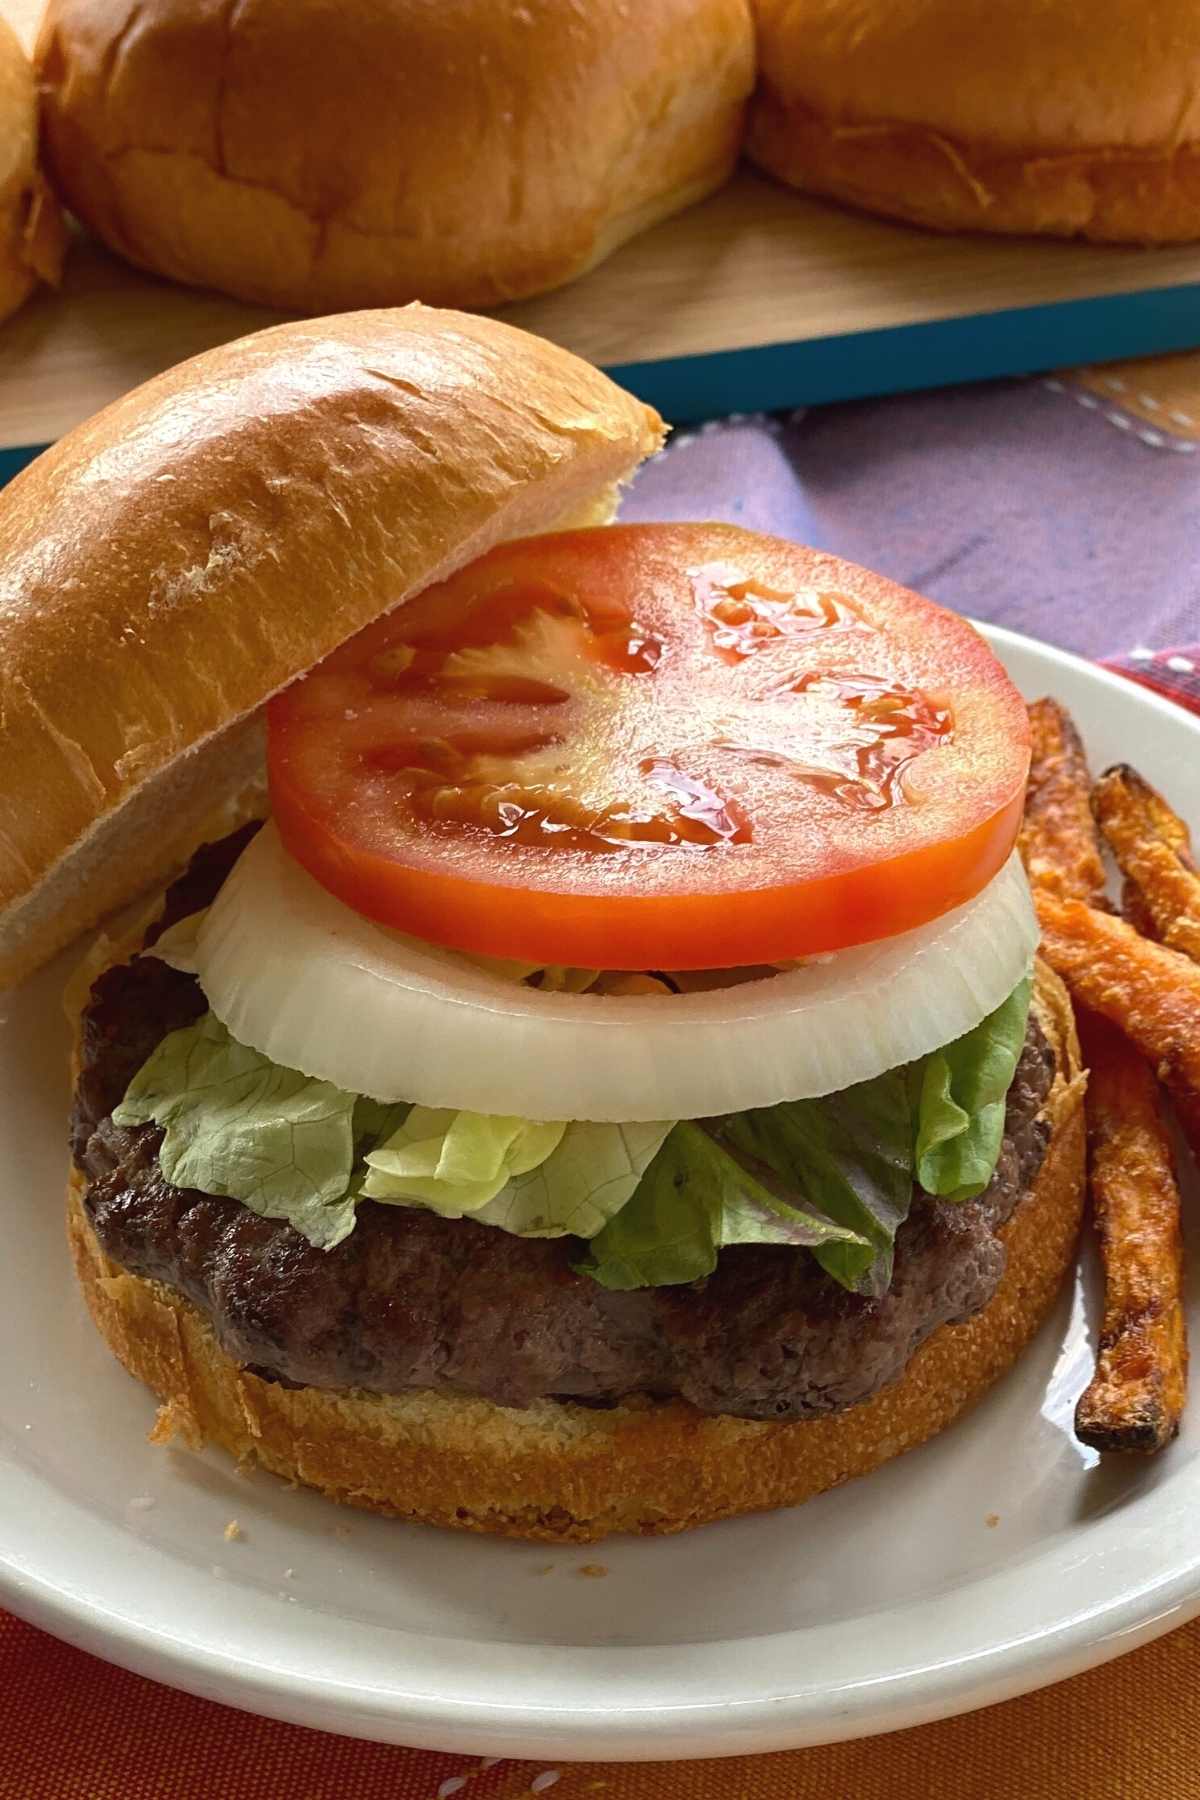 American Wagyu burger on a brioche bun topped with lettuce, onion and tomato.